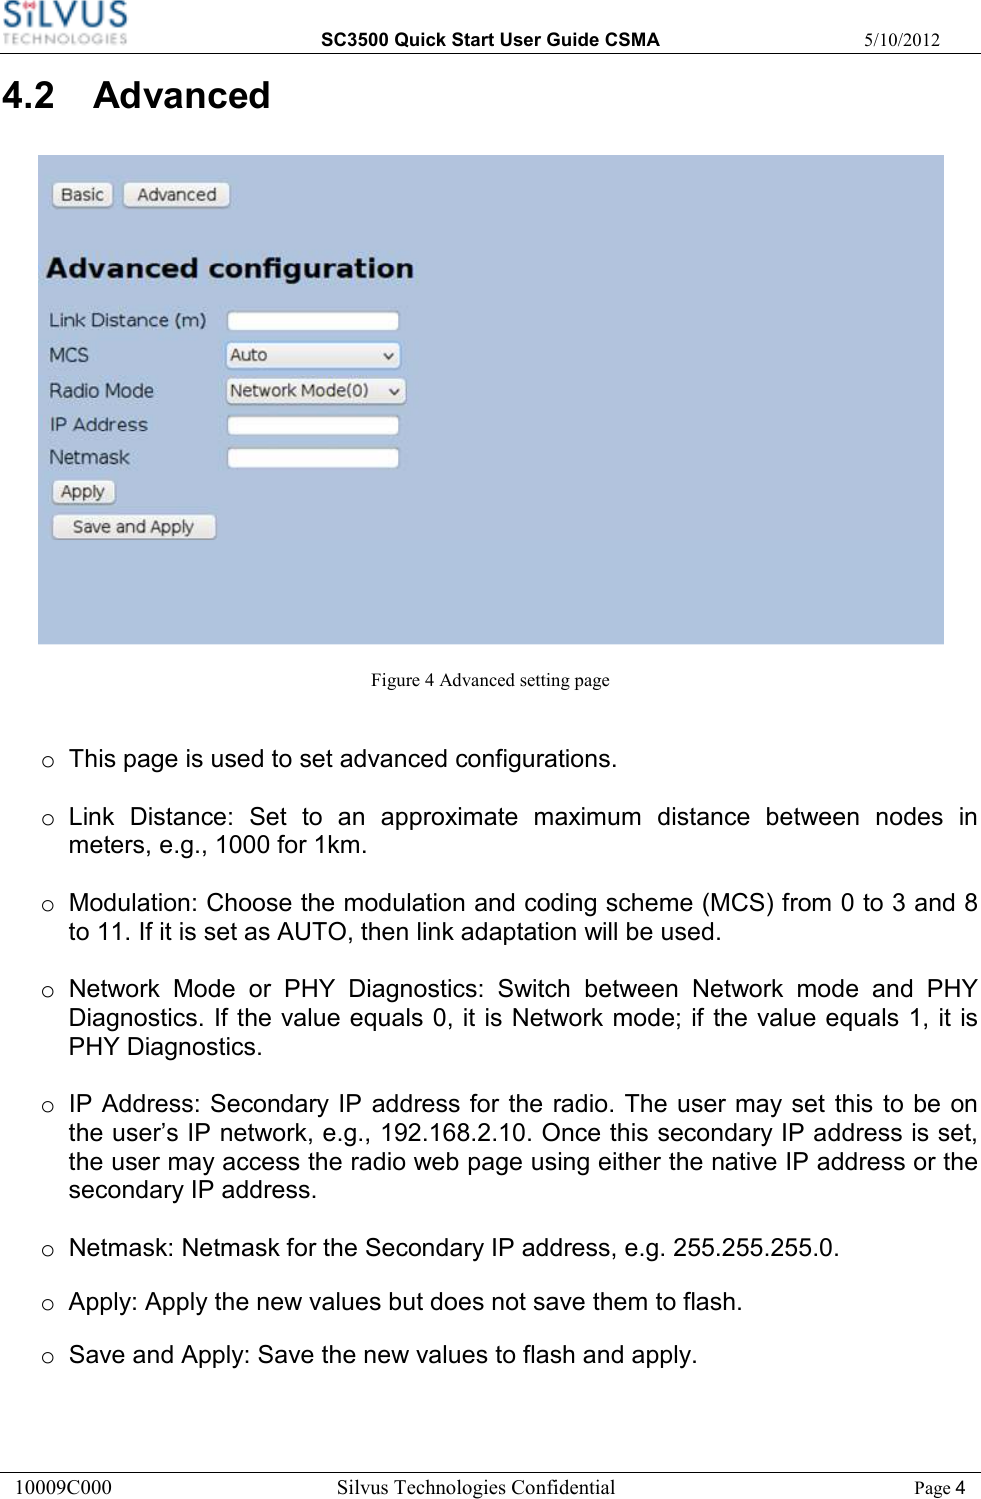  SC3500 Quick Start User Guide CSMA  5/10/2012 10009C000       Silvus Technologies Confidential    Page 4 4.2  Advanced  Figure 4 Advanced setting page  o  This page is used to set advanced configurations.  o  Link  Distance:  Set  to  an  approximate  maximum  distance  between  nodes  in meters, e.g., 1000 for 1km.  o  Modulation: Choose the modulation and coding scheme (MCS) from 0 to 3 and 8 to 11. If it is set as AUTO, then link adaptation will be used.  o  Network  Mode  or  PHY  Diagnostics:  Switch  between  Network  mode  and  PHY Diagnostics. If the value equals 0, it is Network mode; if the value equals 1, it is PHY Diagnostics.  o  IP Address: Secondary IP address for the radio. The user may set  this to be on the user’s IP network, e.g., 192.168.2.10. Once this secondary IP address is set, the user may access the radio web page using either the native IP address or the secondary IP address.  o  Netmask: Netmask for the Secondary IP address, e.g. 255.255.255.0. o  Apply: Apply the new values but does not save them to flash. o  Save and Apply: Save the new values to flash and apply. 